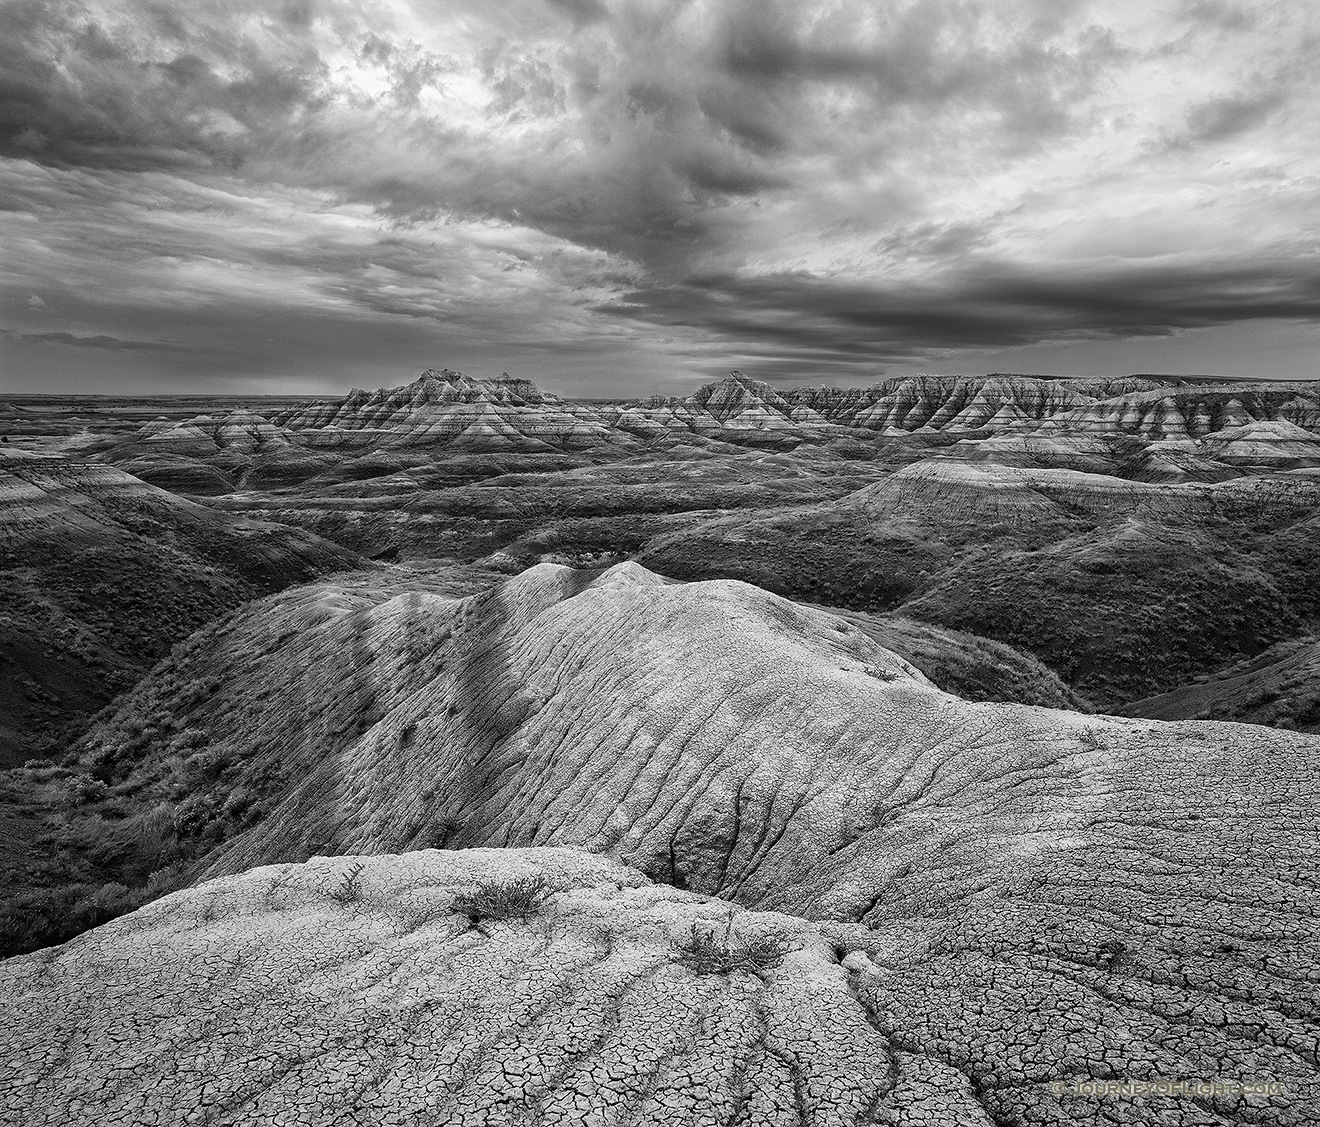 Rocks and formations under stormy skies in Badlands National Park, South Dakota. - South Dakota Picture